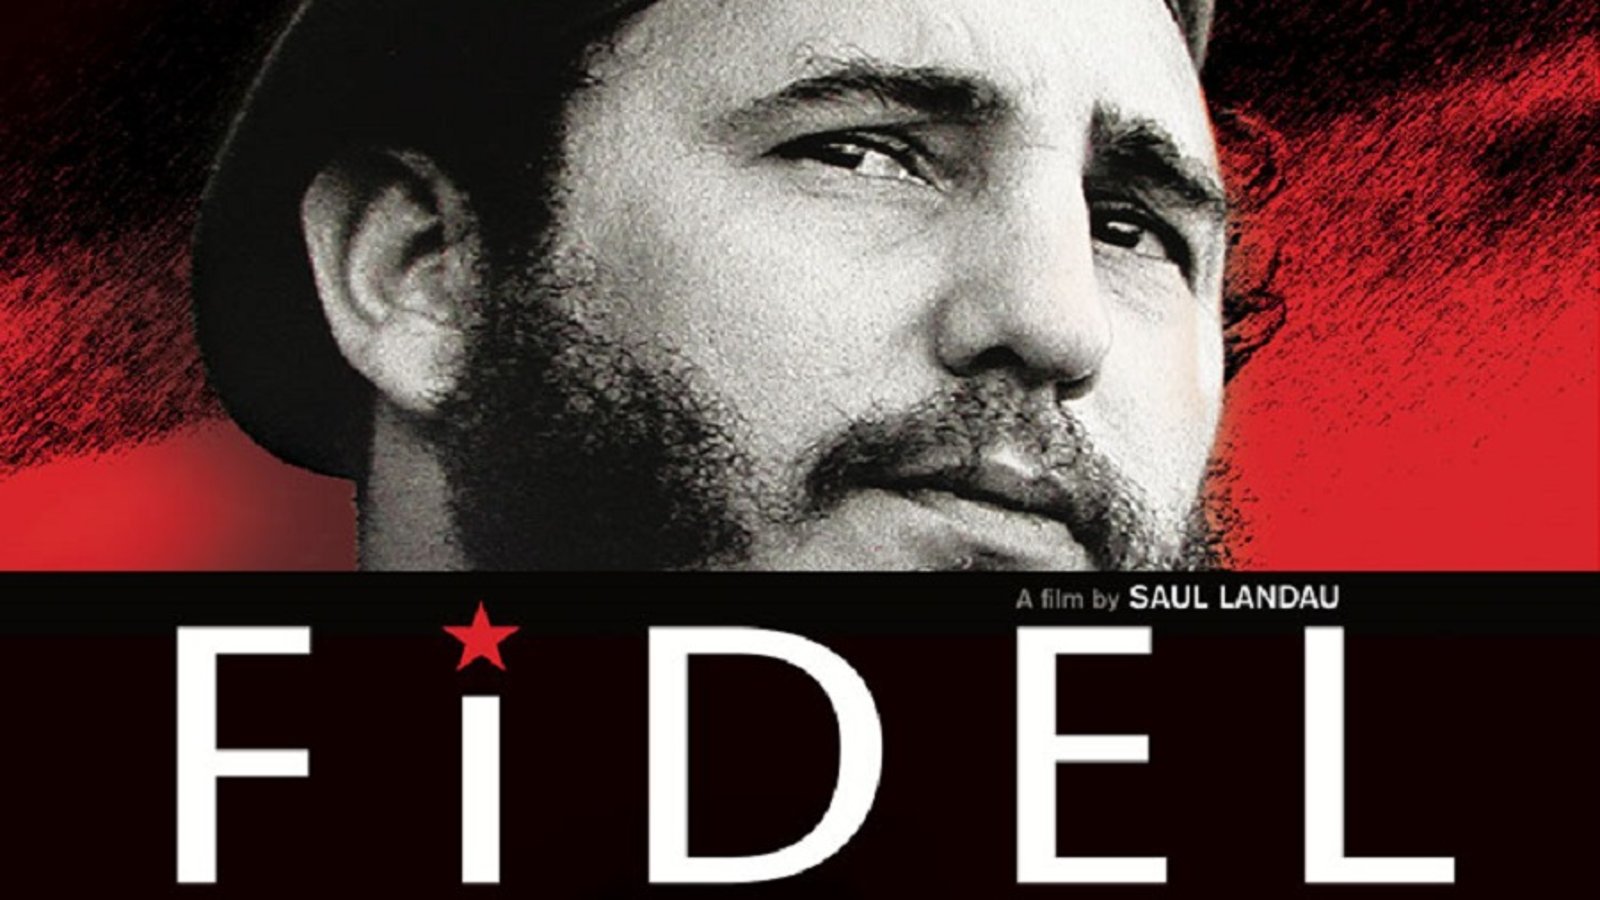 Fidel - The Life and Leadership of Fidel Castro